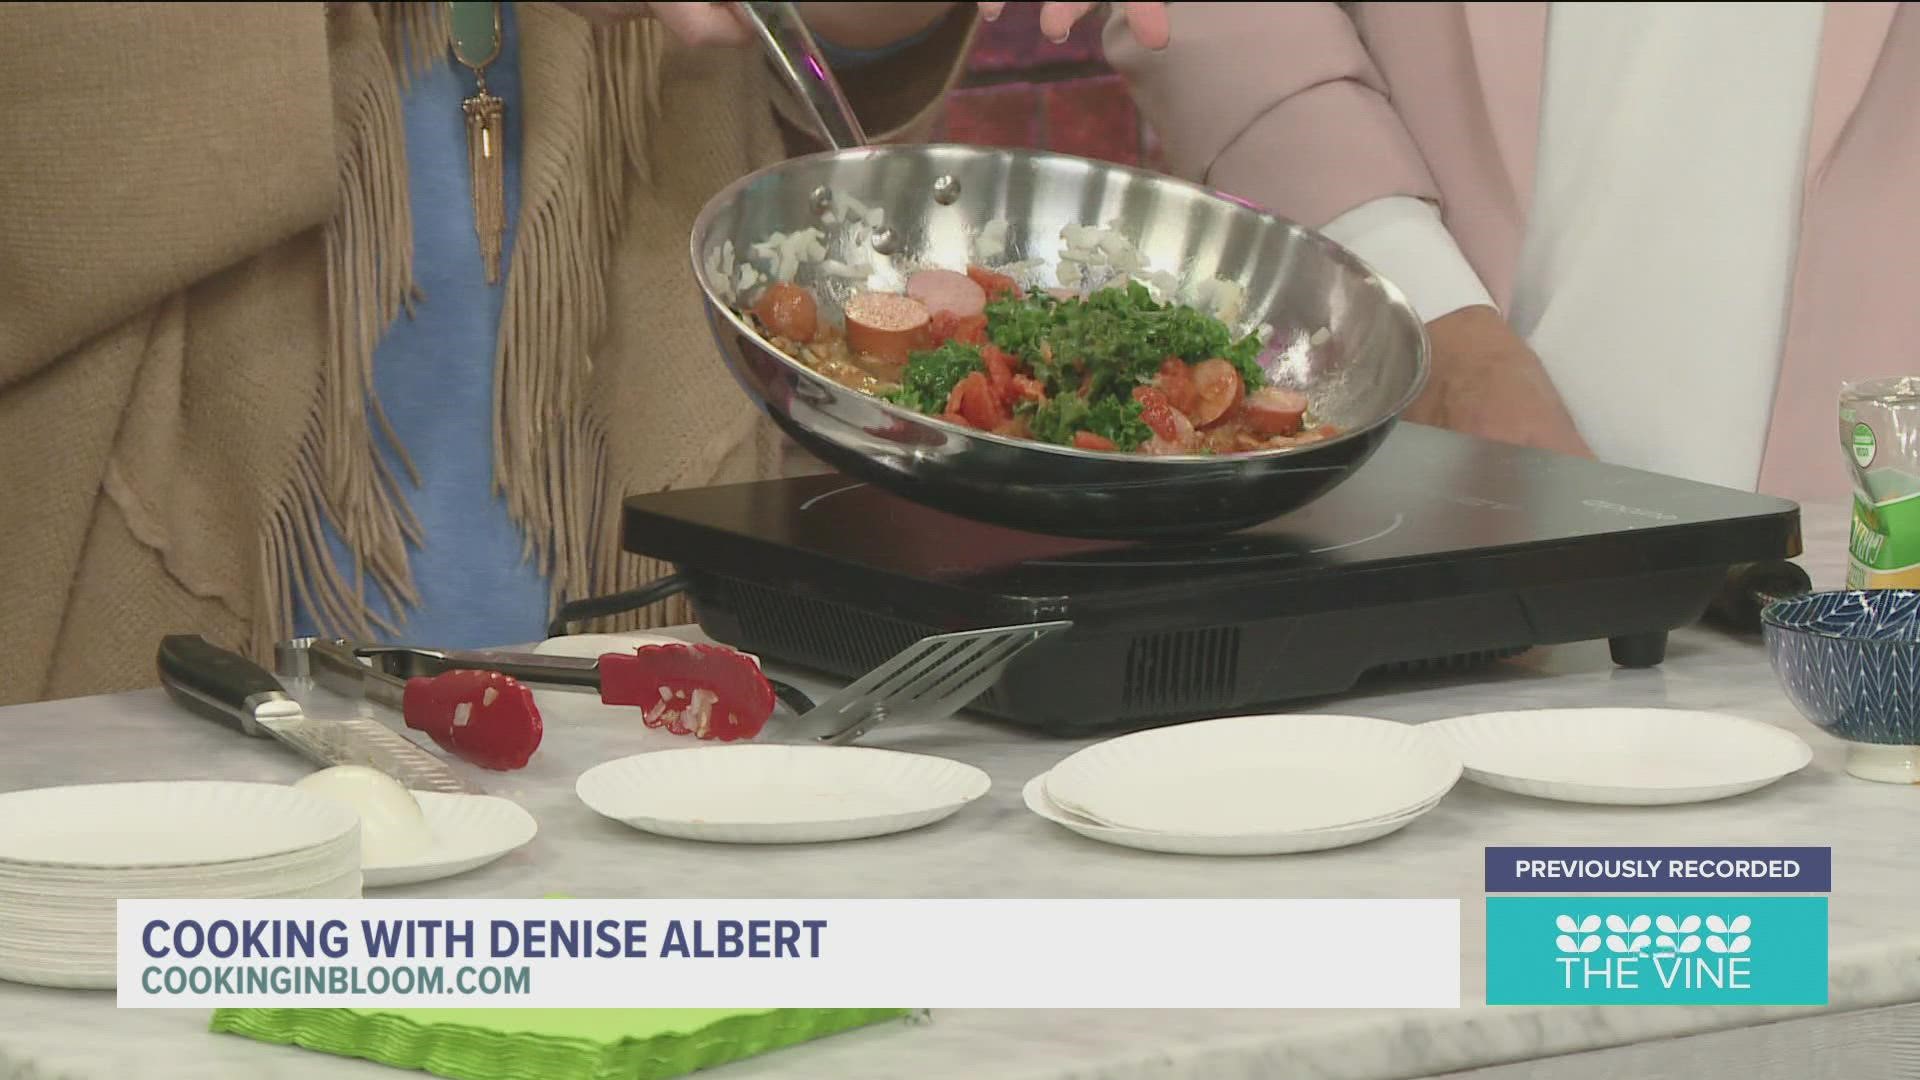 It's almost Memorial Day and you may need something fun to cook for the family this holiday. Our friend Denise Albert has an idea for you.